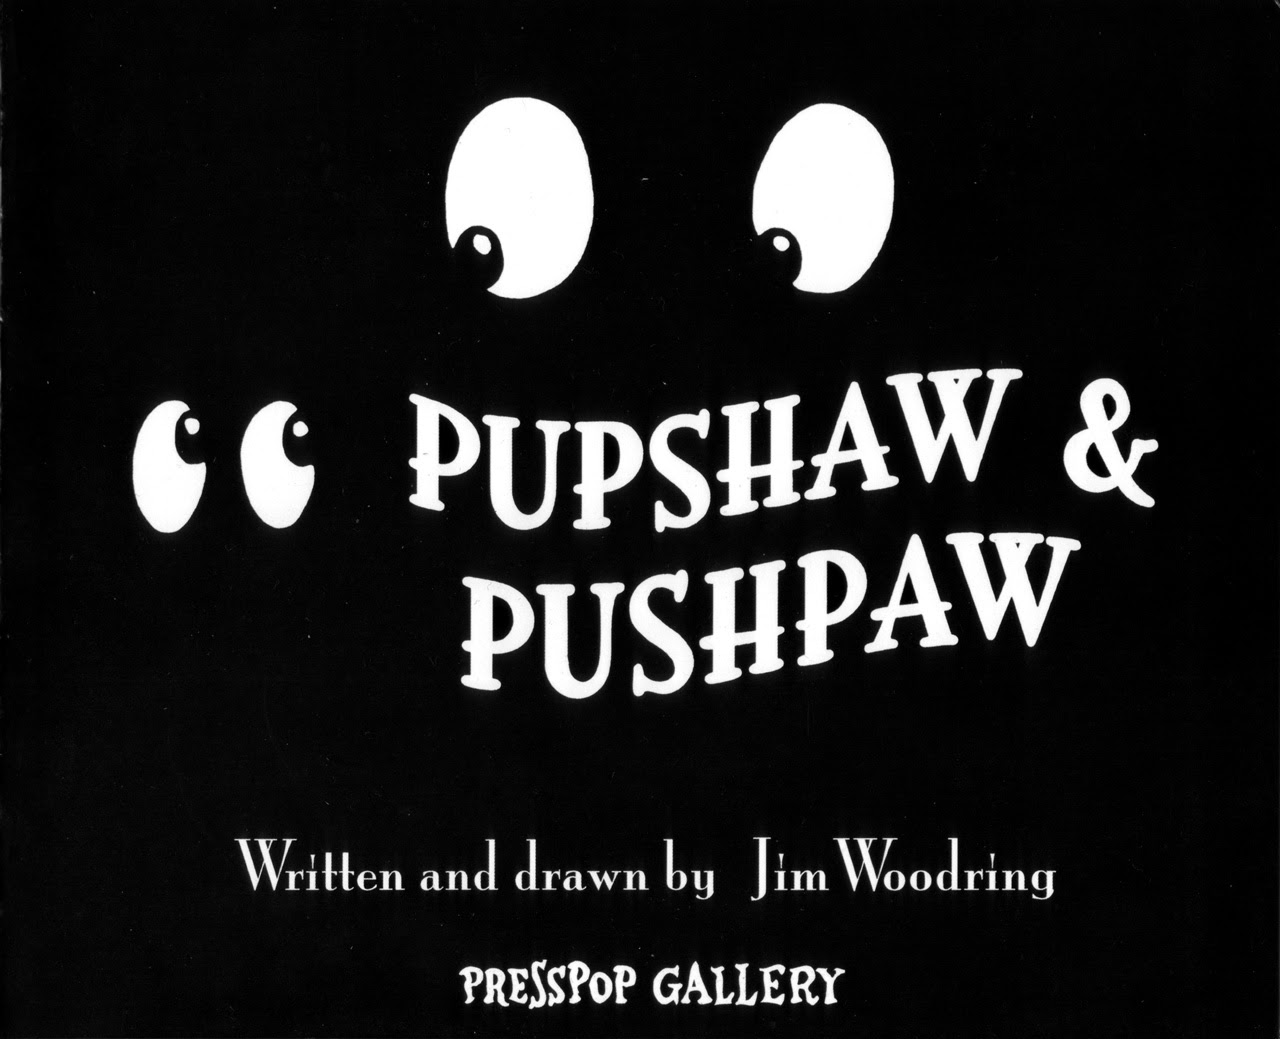 Read online Pupshaw and Pushpaw comic -  Issue # Full - 3